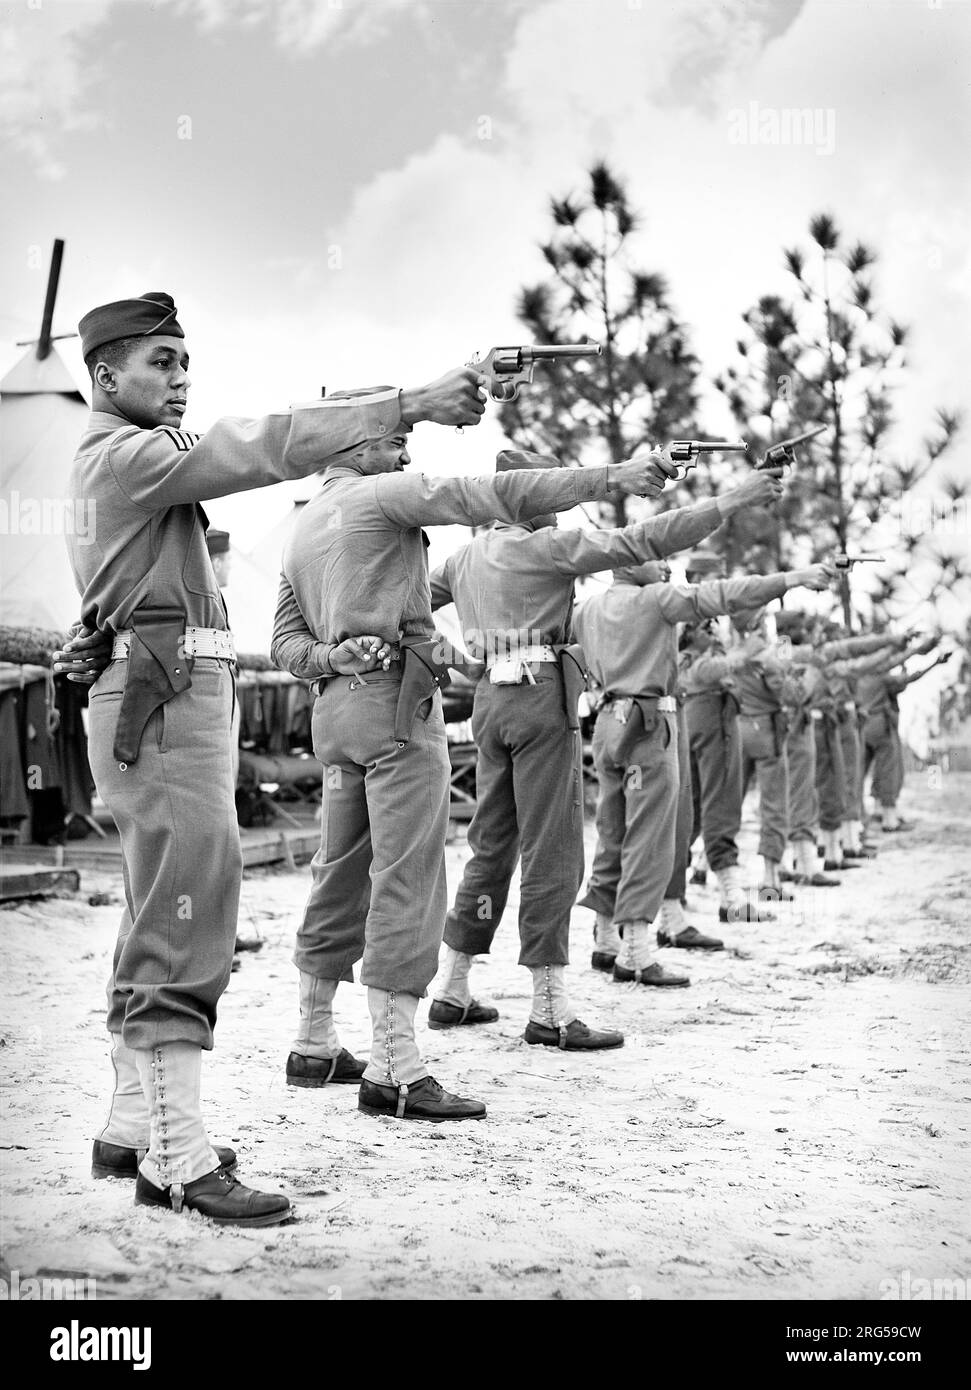 Sergeant Franklin Williams and soldiers of 41st Engineers at pistol practice, Fort Bragg, North Carolina, USA, Arthur Rothstein, U.S. Office of War Information, March 1942 Stock Photo